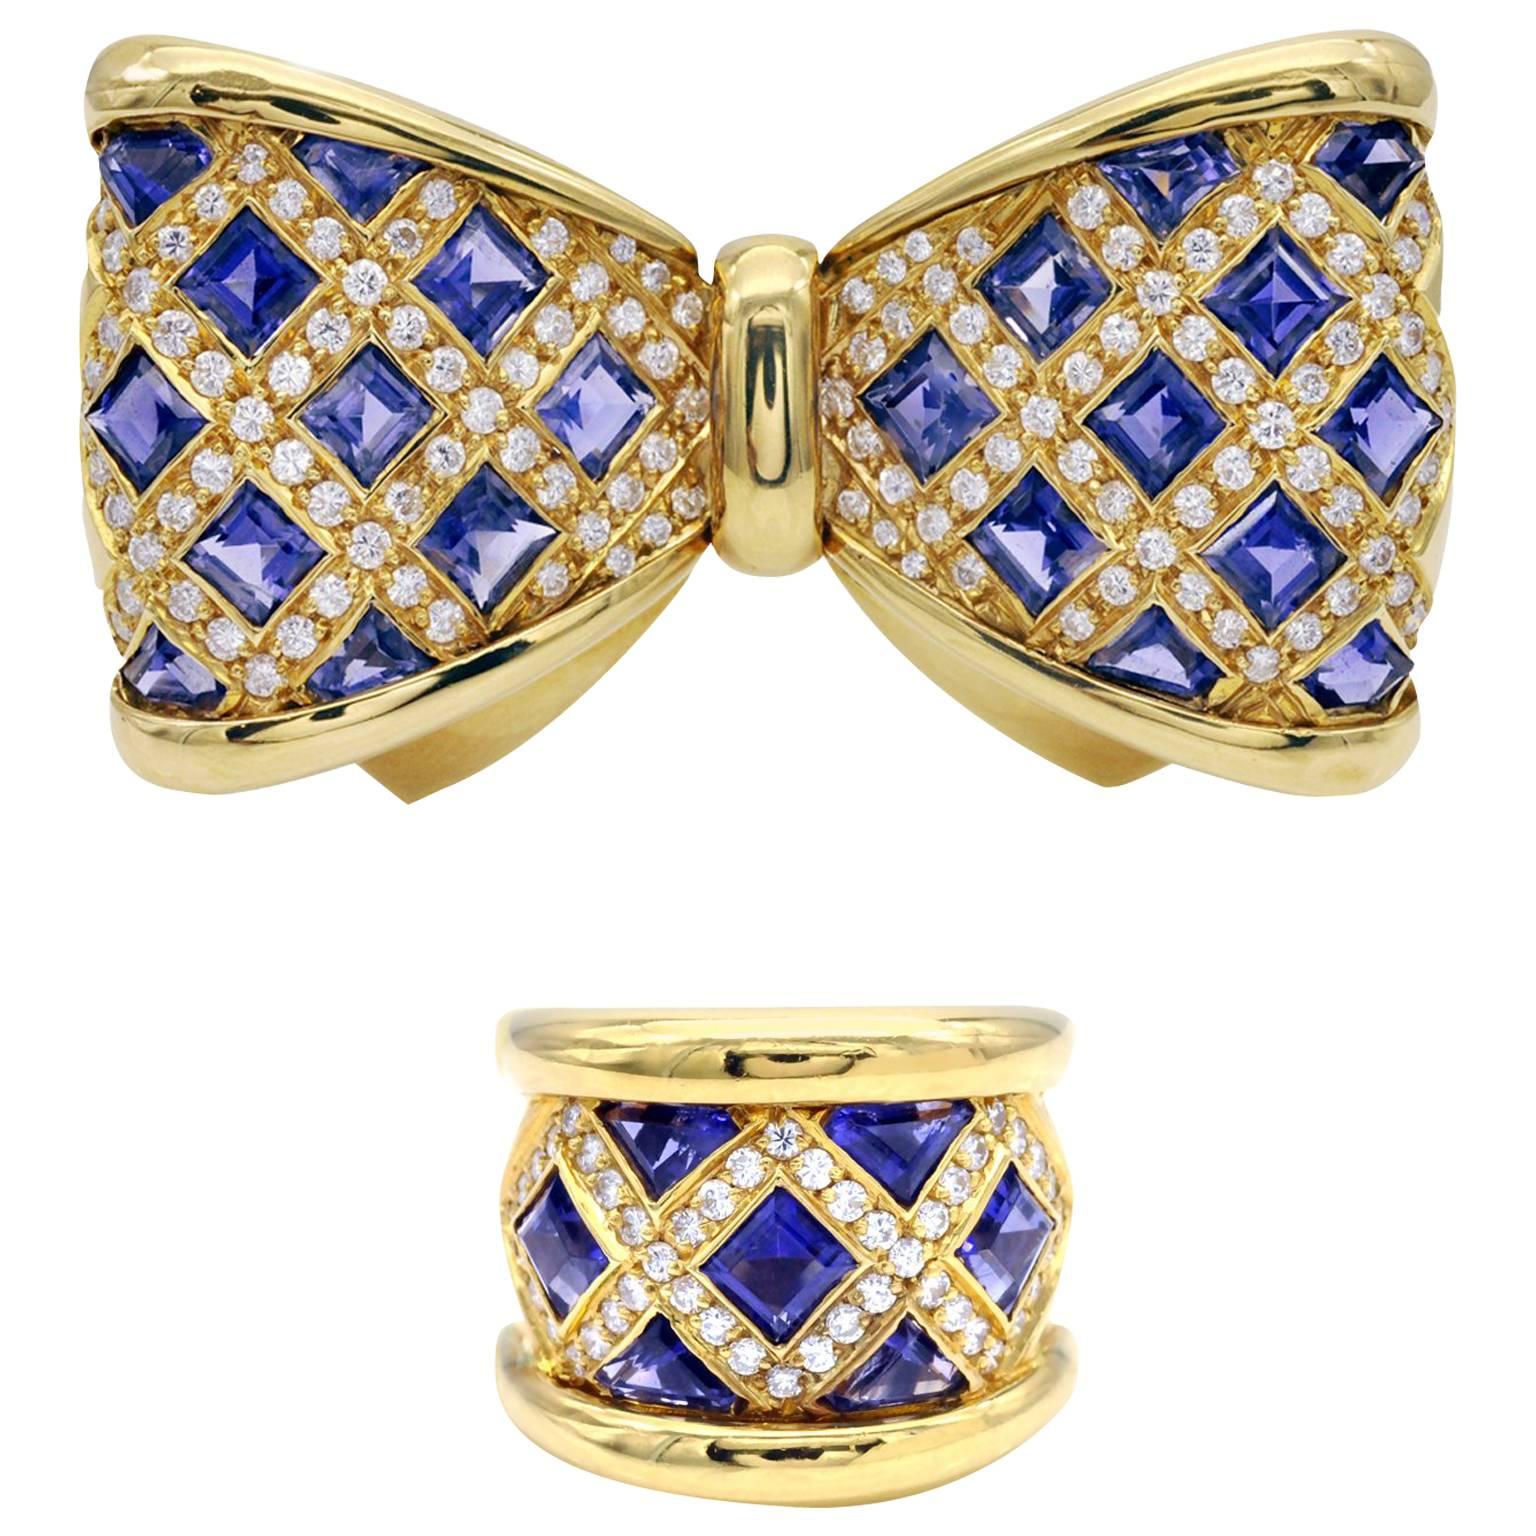 Diamond and Iolite Gold Bowtie Brooch and Ring Set